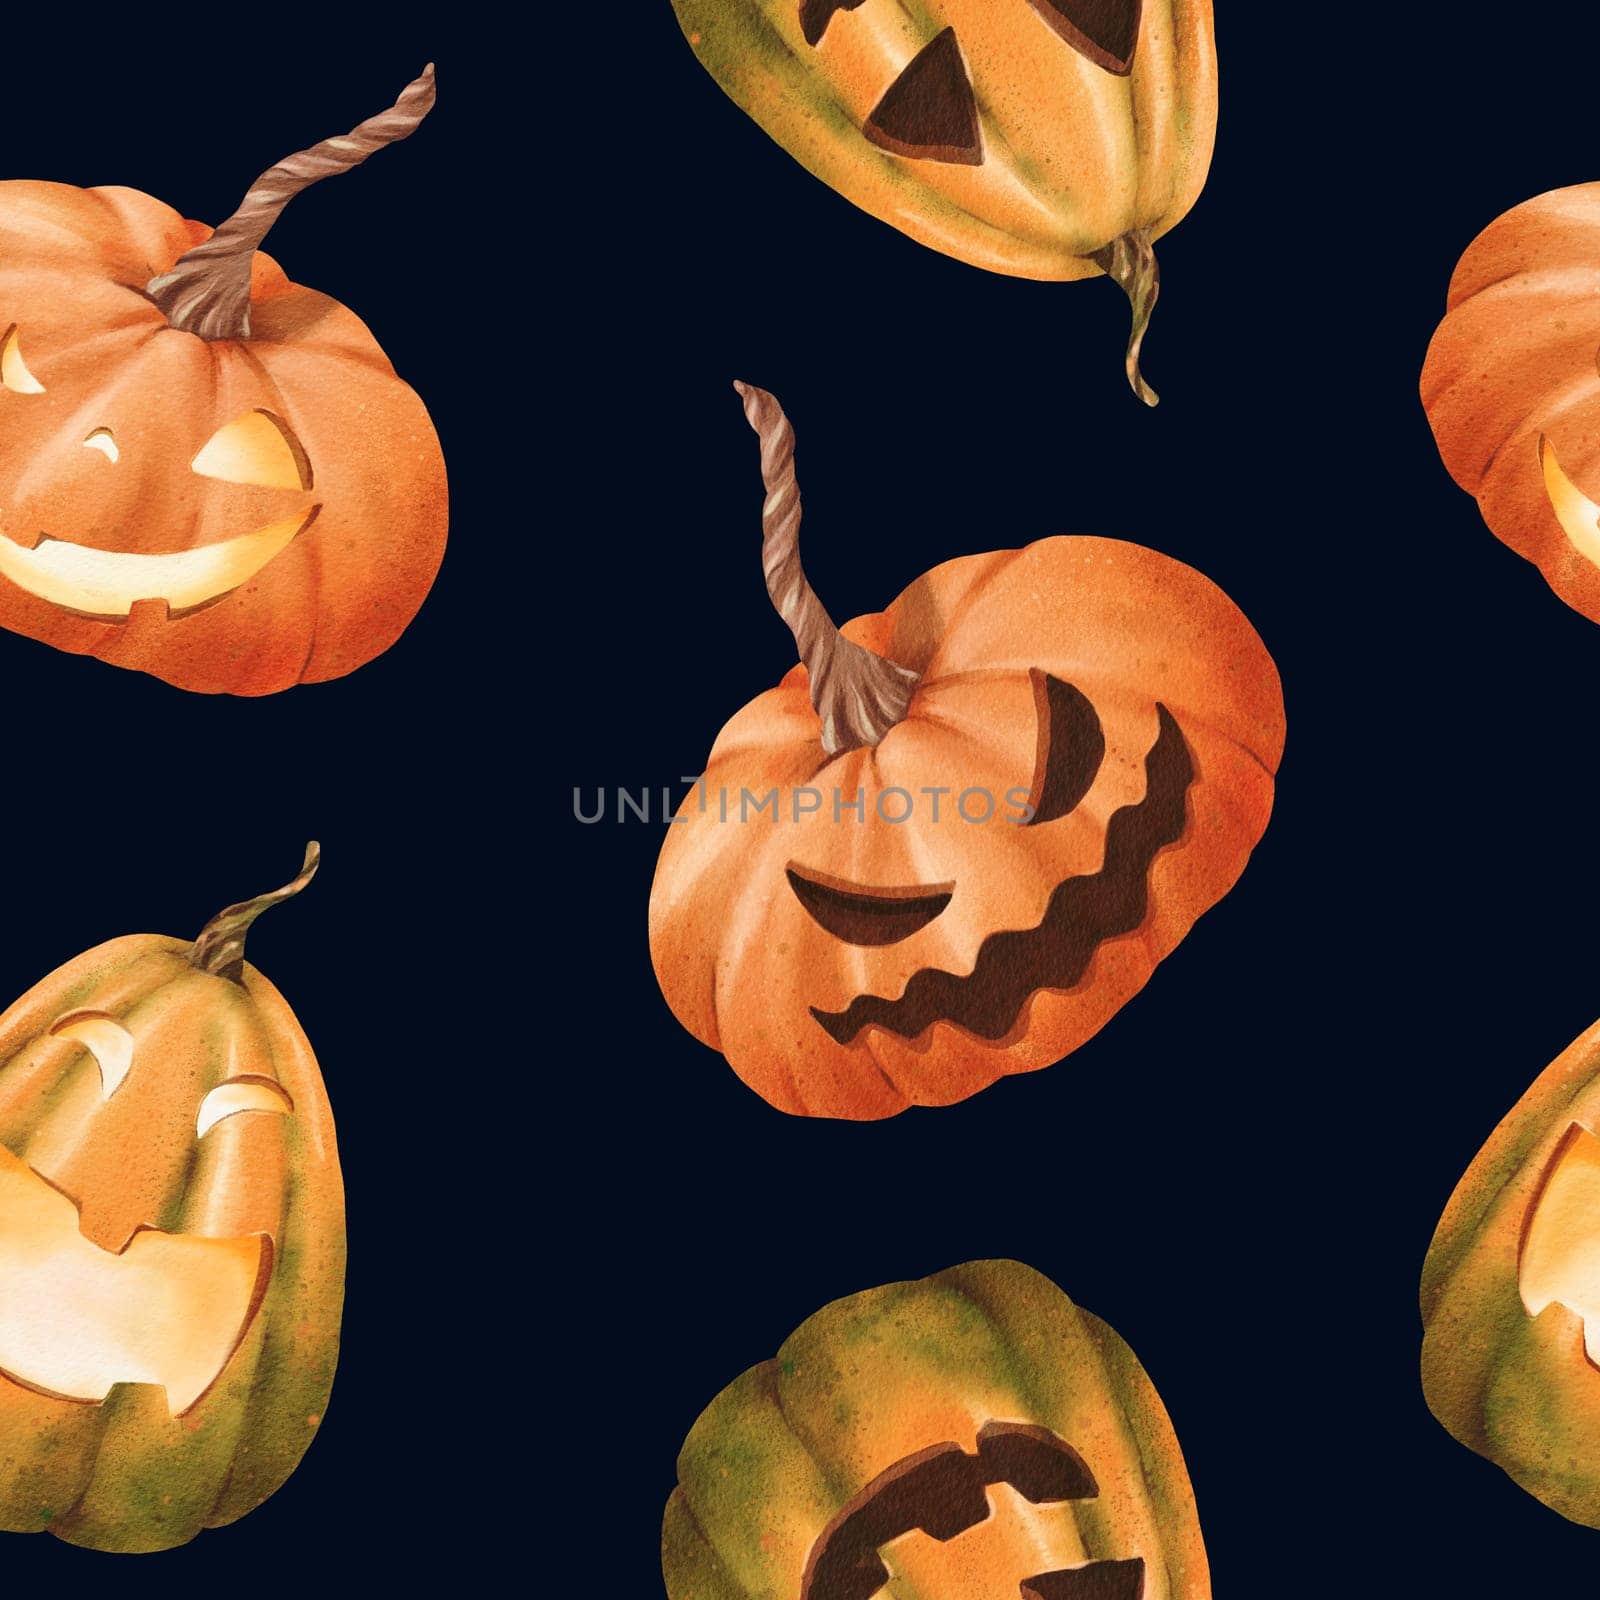 Seamless Halloween pattern with bright orange pumpkins sporting carved faces, capturing classic holiday motifs. Dark background. Watercolor illustration suitable for packaging, textiles, and books by Art_Mari_Ka